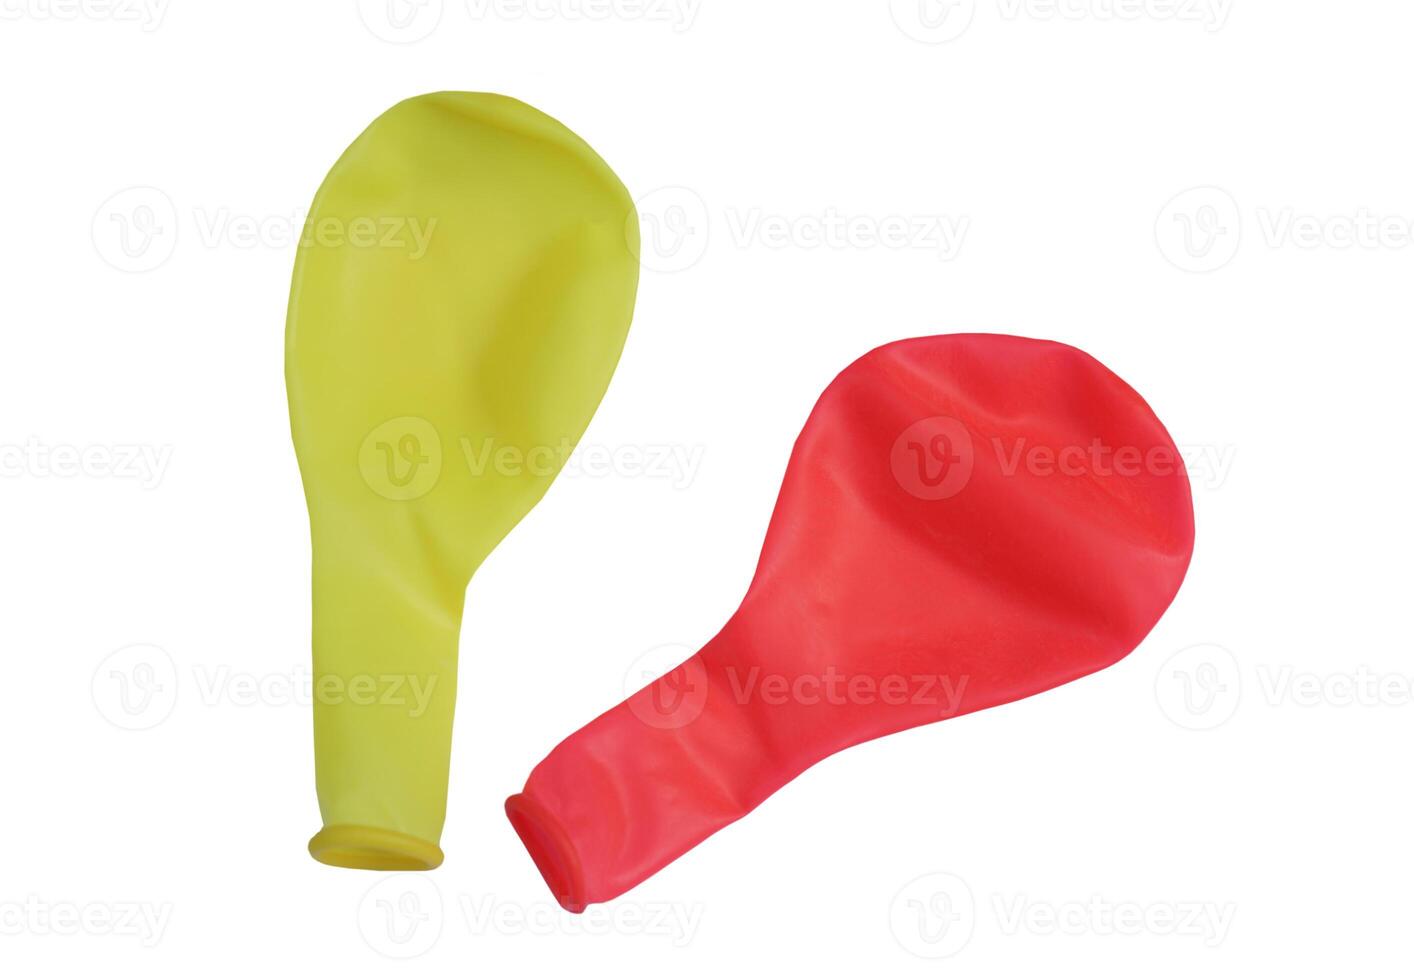 Red and rellow balloons on white background, flat, no air inside. Concept, equipment for decoration party, celebration,toy for playing games or doing science experiment. photo